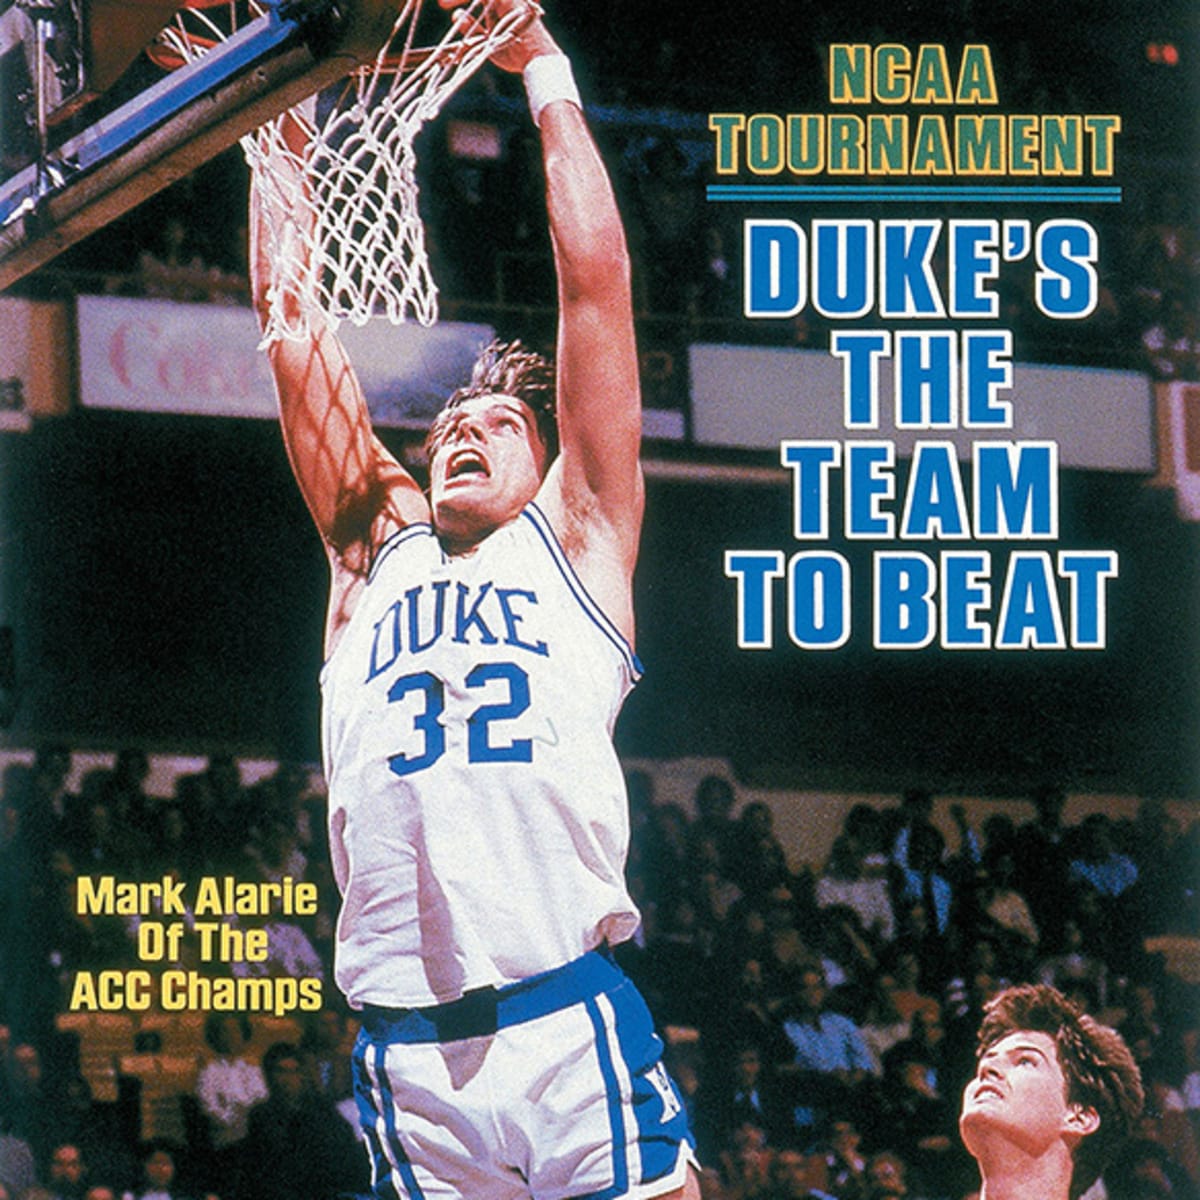 April 14, 1986 Table Of Contents - Sports Illustrated Vault